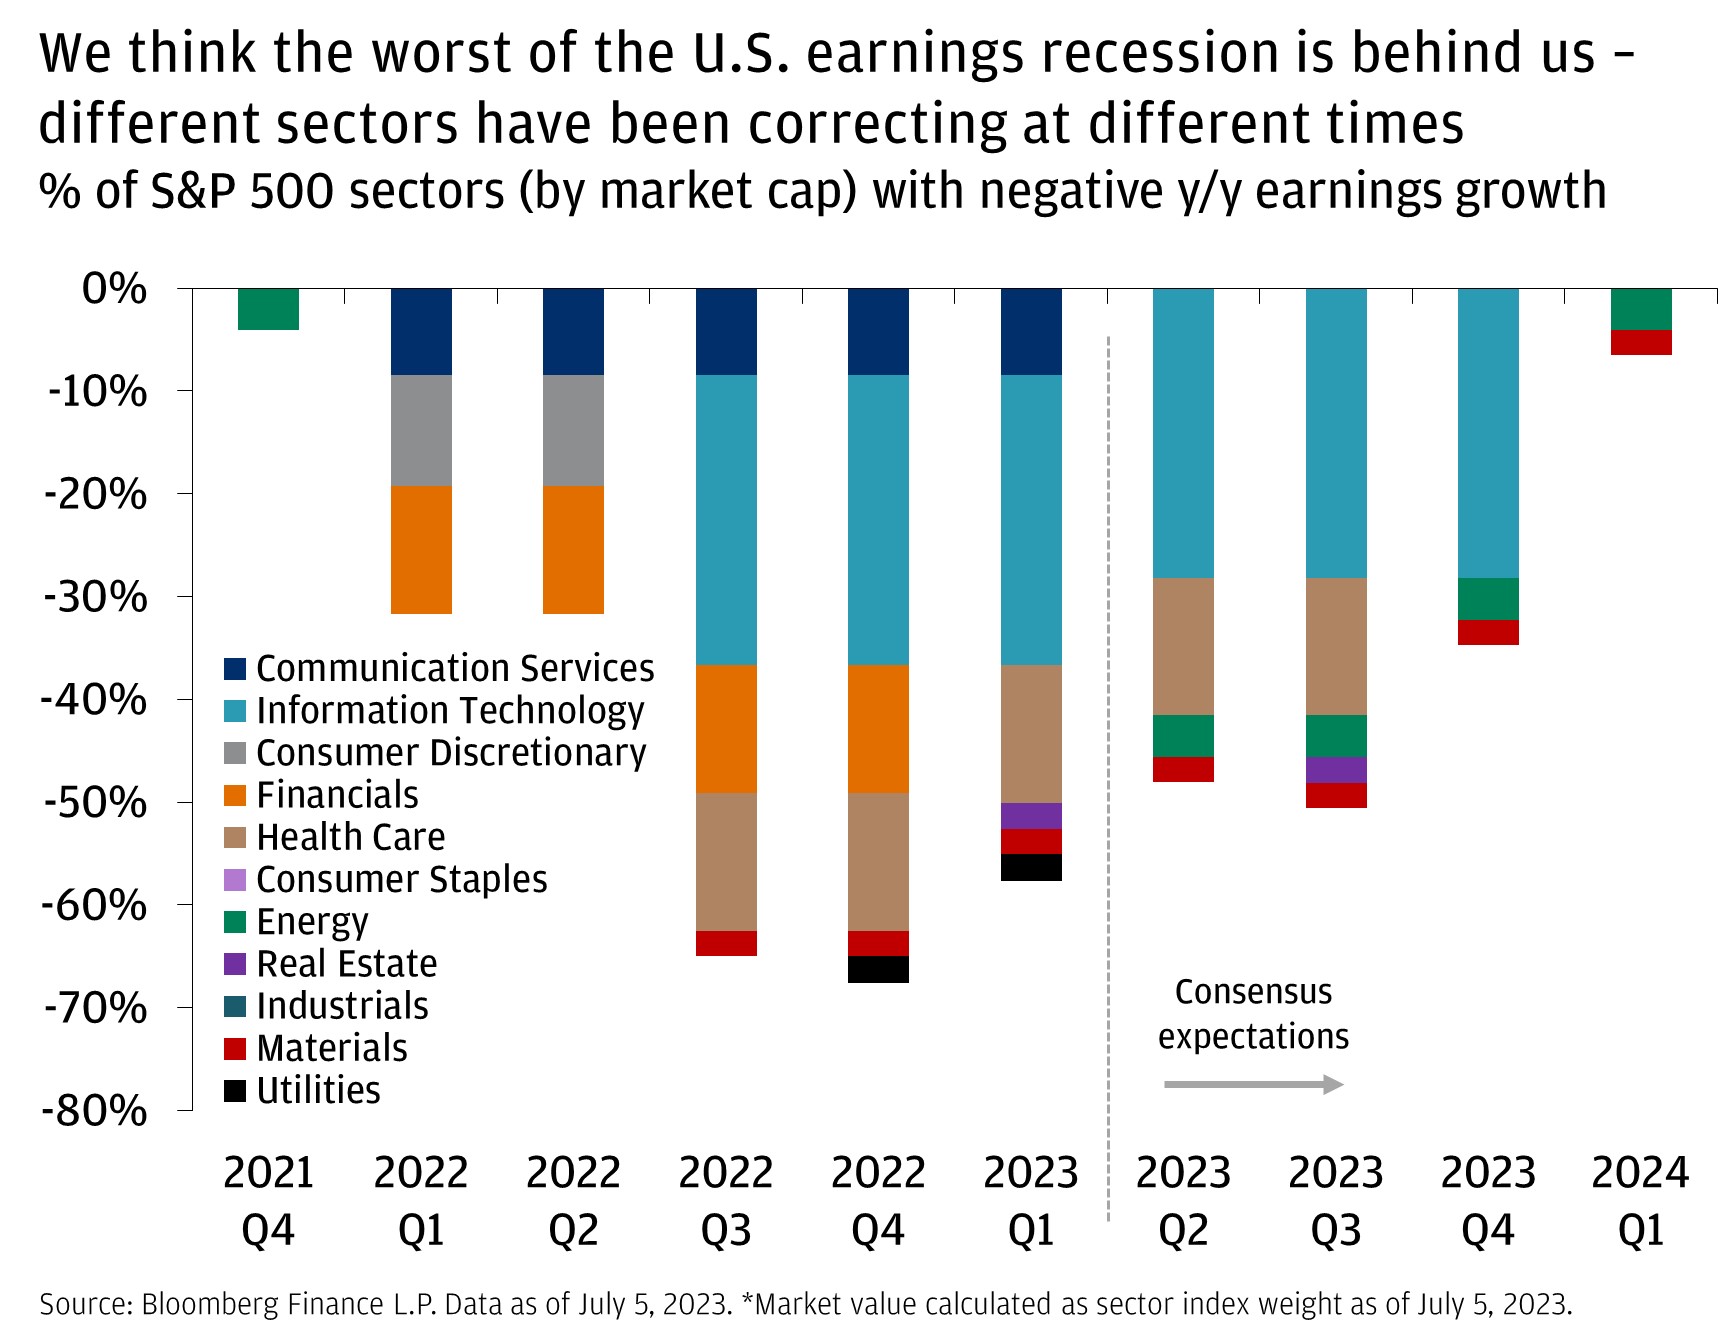 We think the worst of the U.S. earnings recession is behind us – different sectors have been correcting at different times